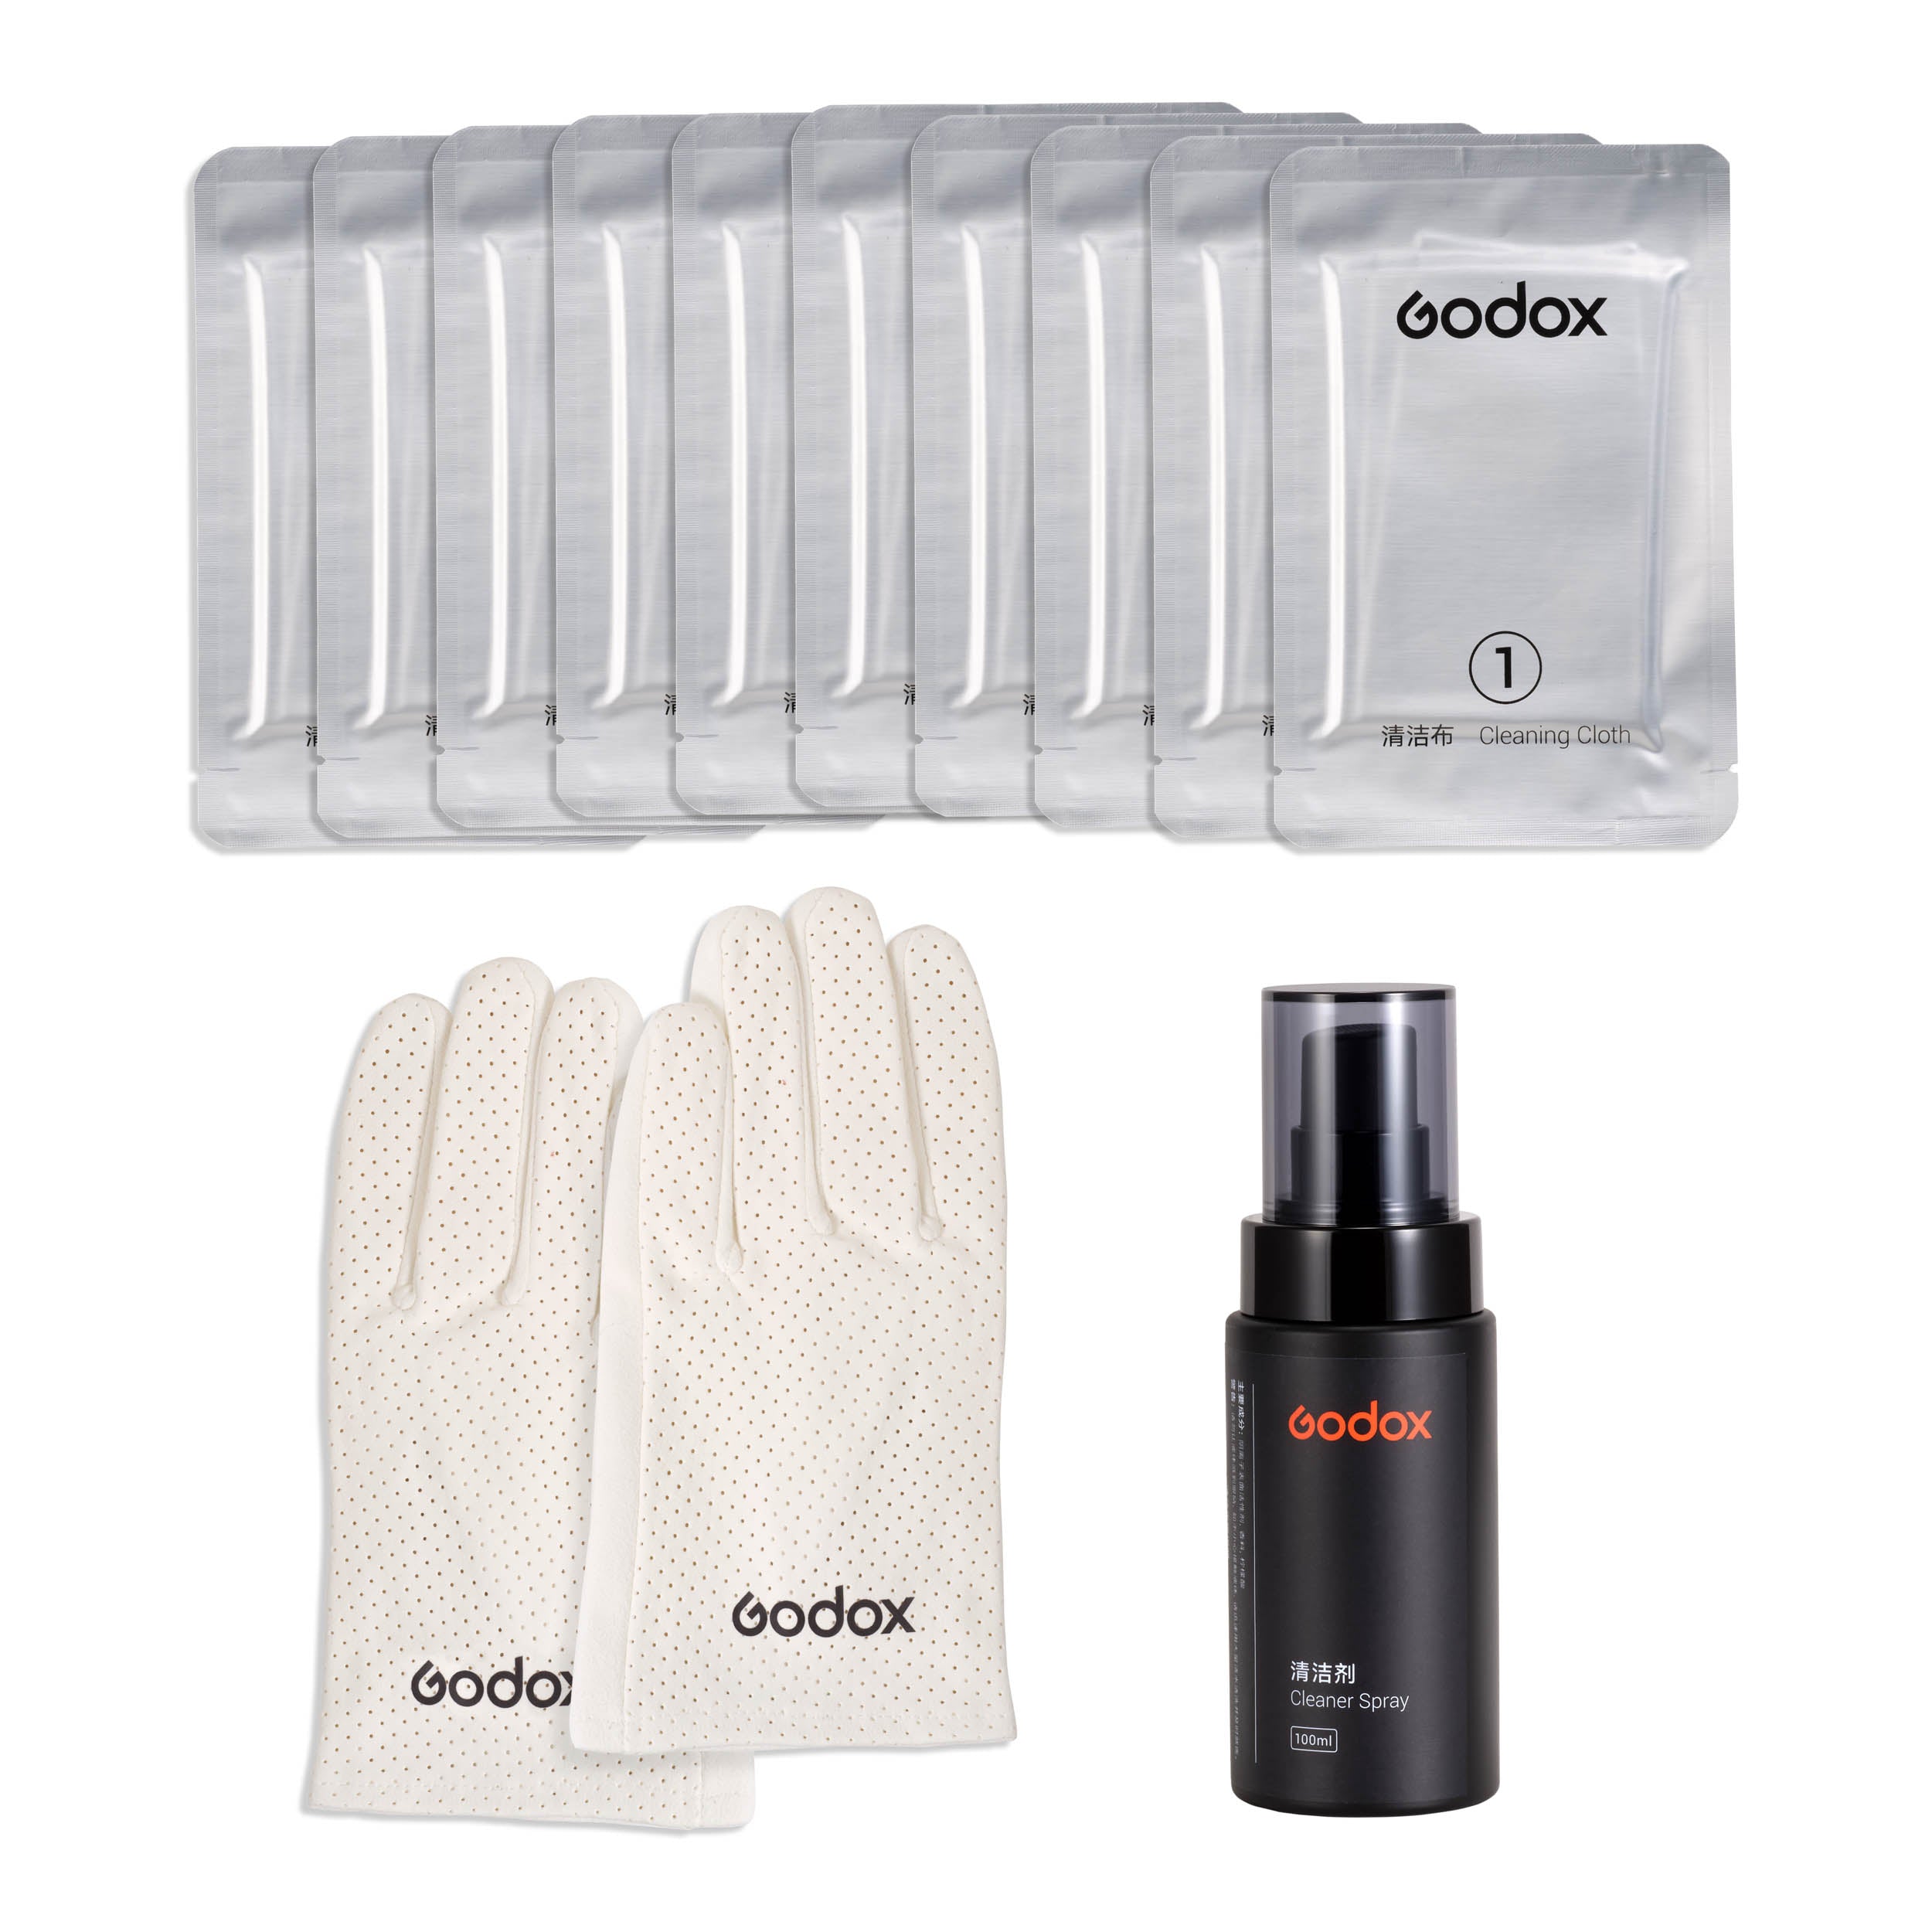 Godox CK01 Cleaning Kit for the KNOWLED LiteFlow Cine Light Reflector Panels